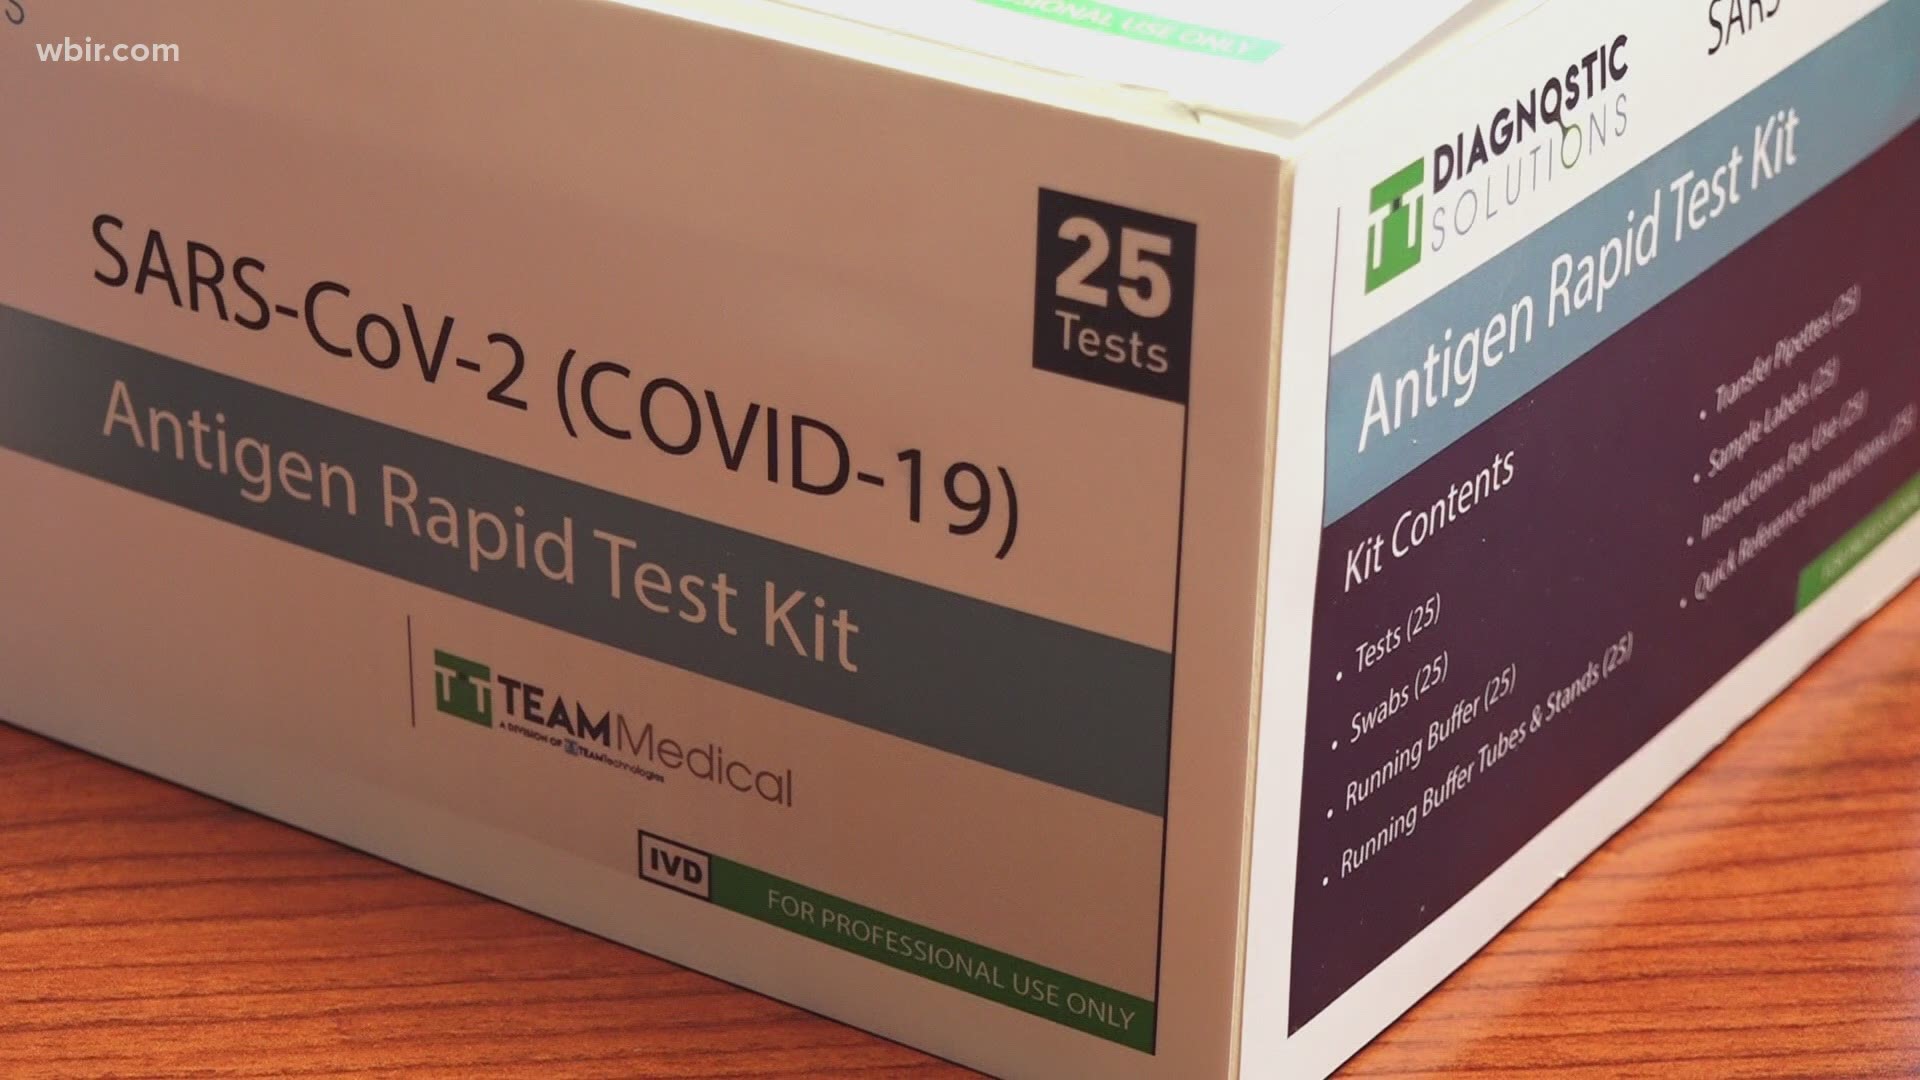 A Morristown company known for making toothbrushes is now making rapid COVID-19 tests.